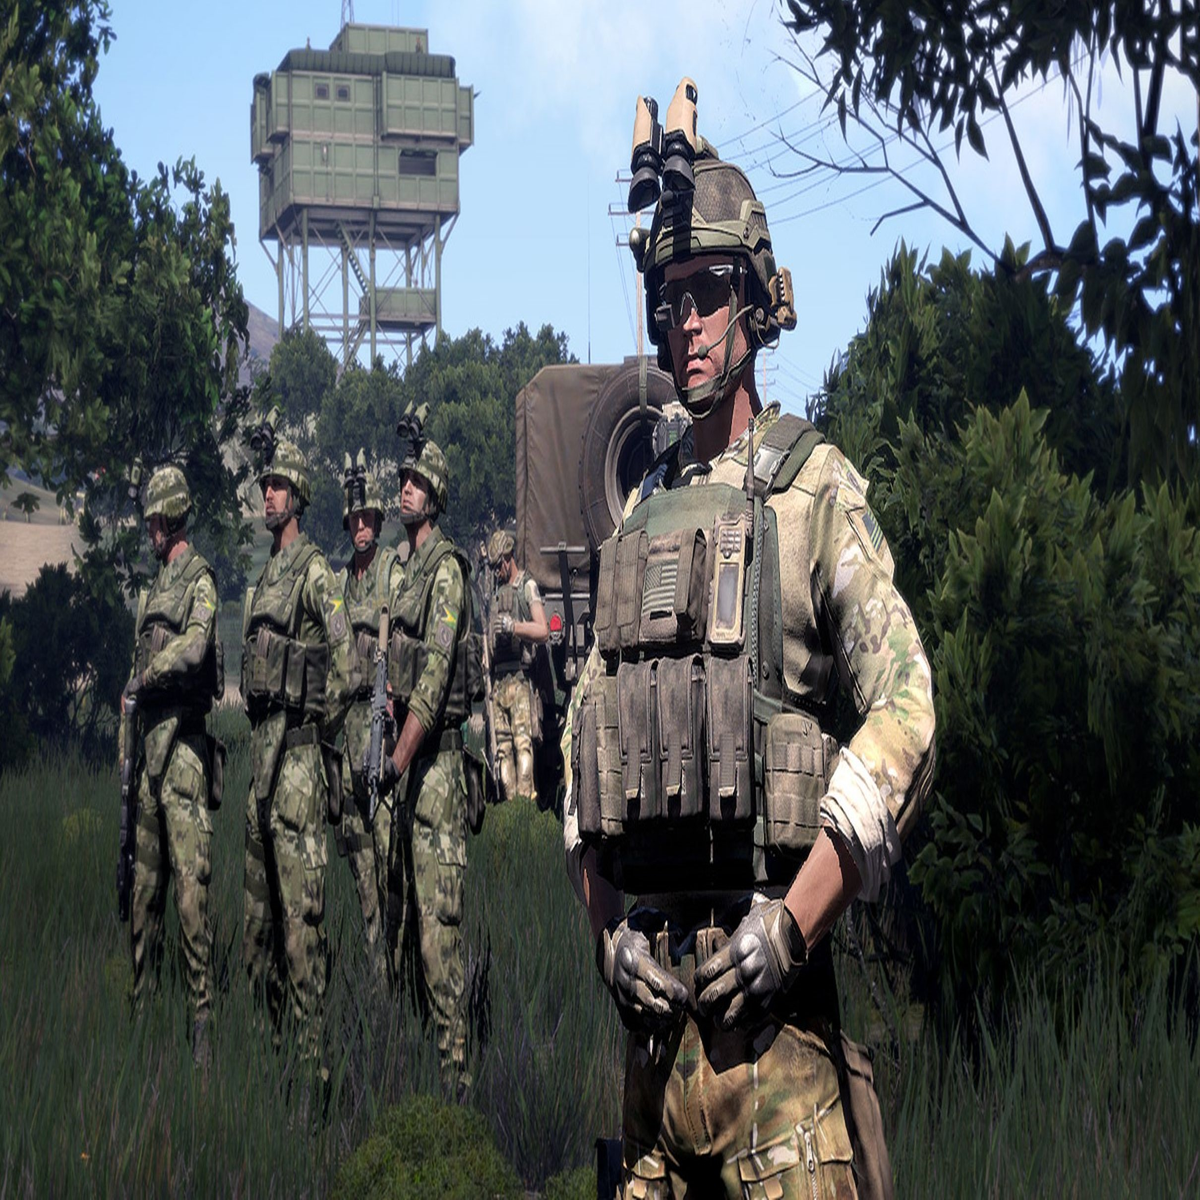 Arma 3 studio says game footage is being used to spread fake news about the  Ukraine war